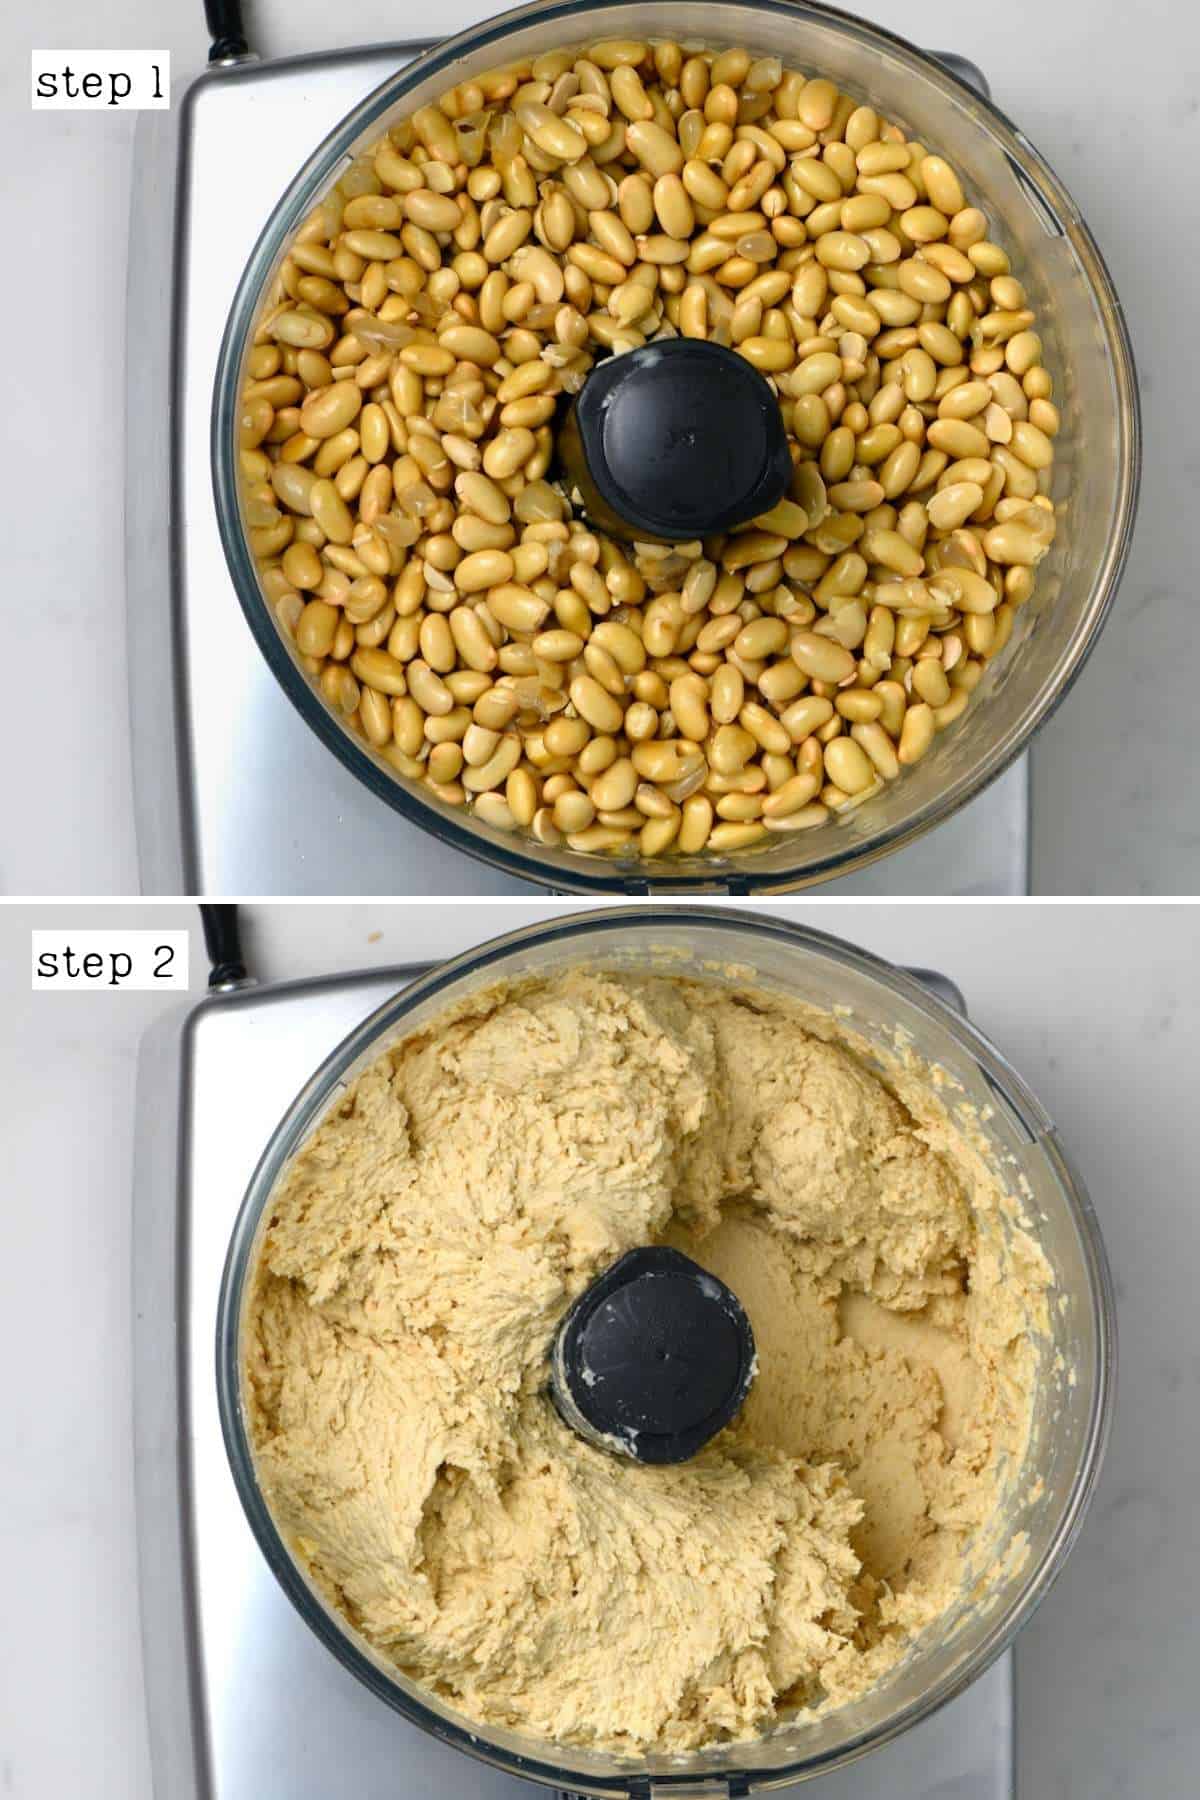 Steps for blending soybeans into paste